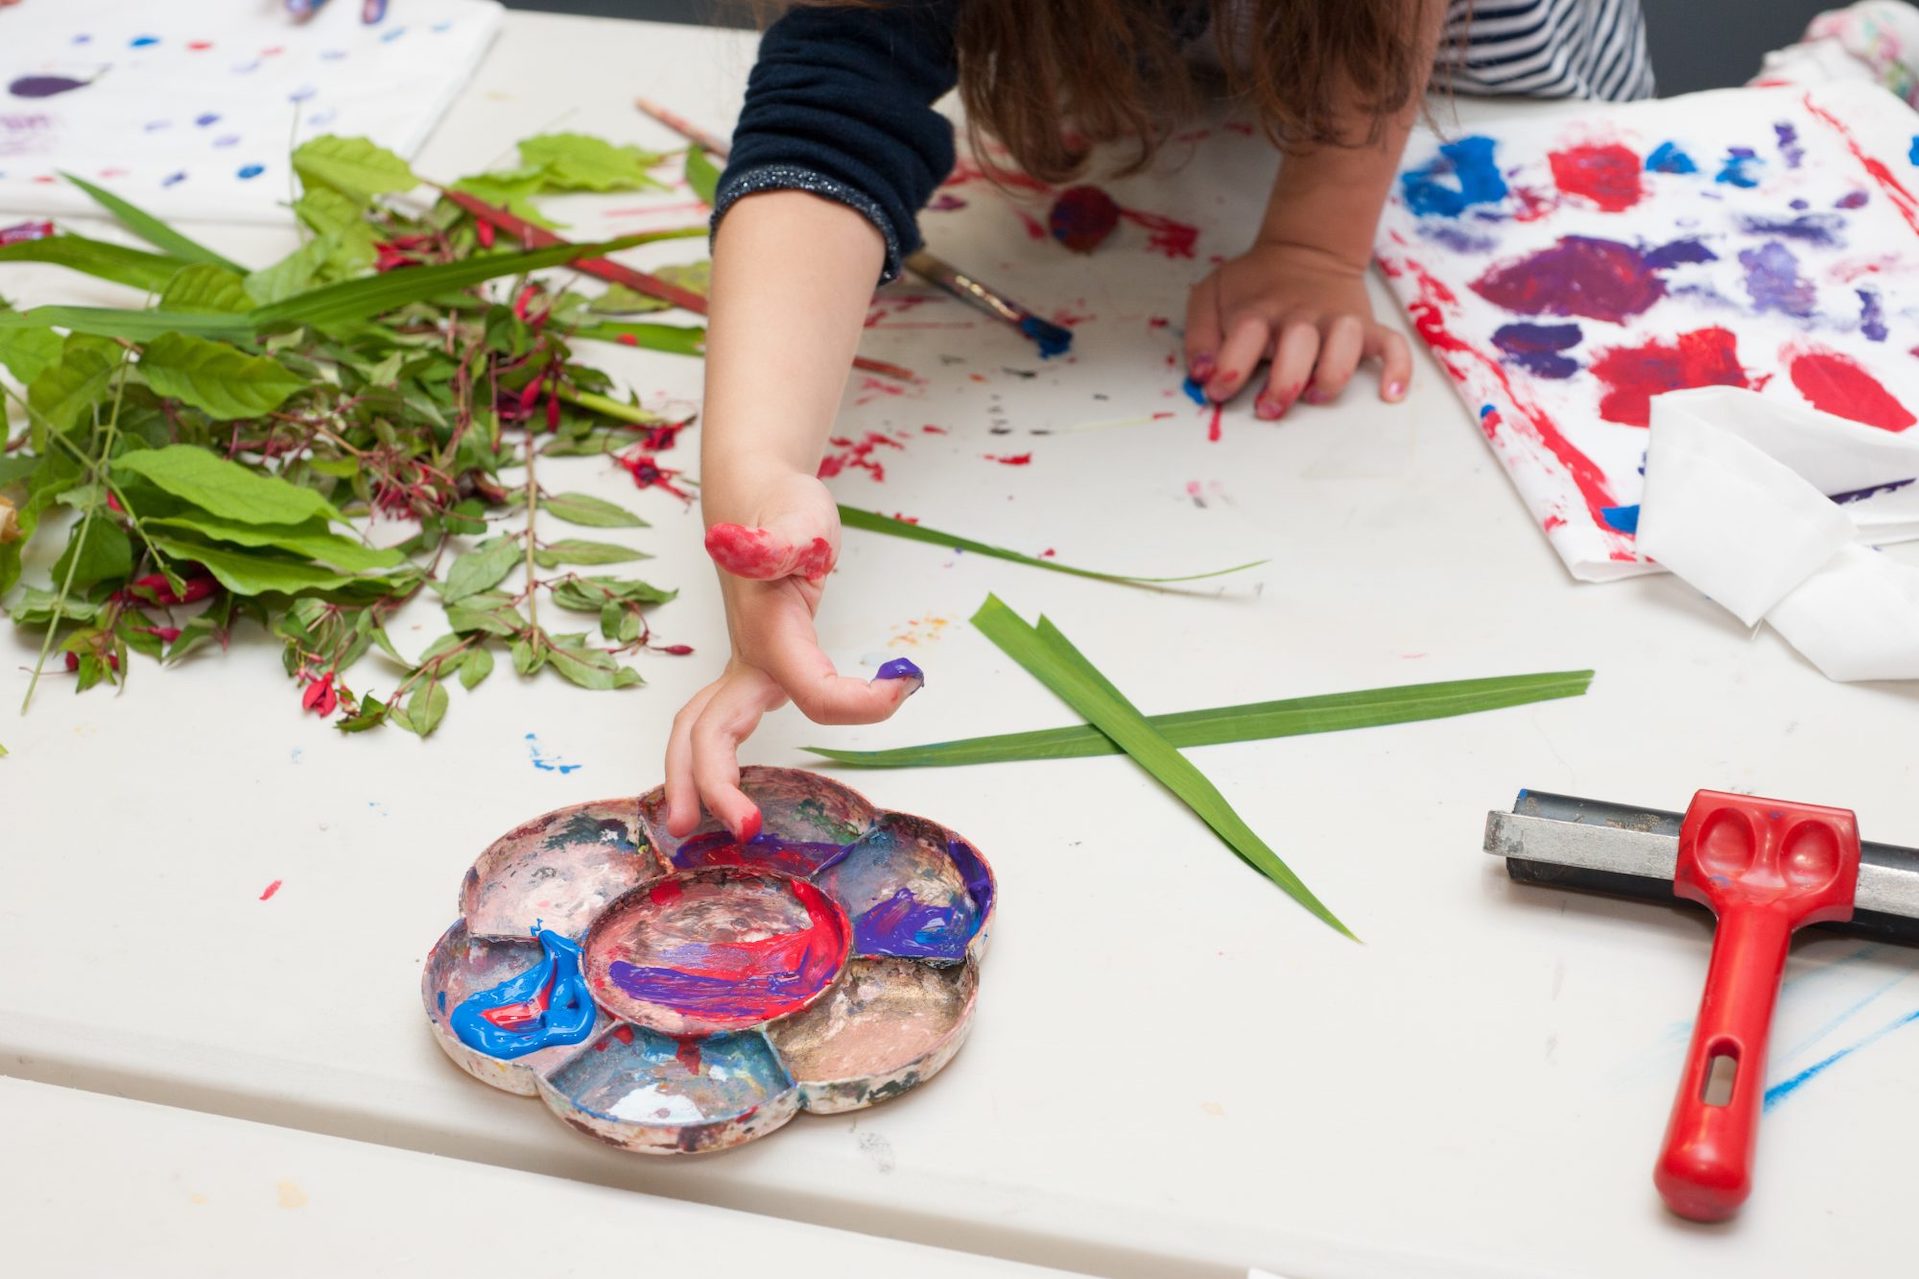 On a white table top, a child's hand and arm are reaching across into a plate of paints with plant leaves and paper beside.